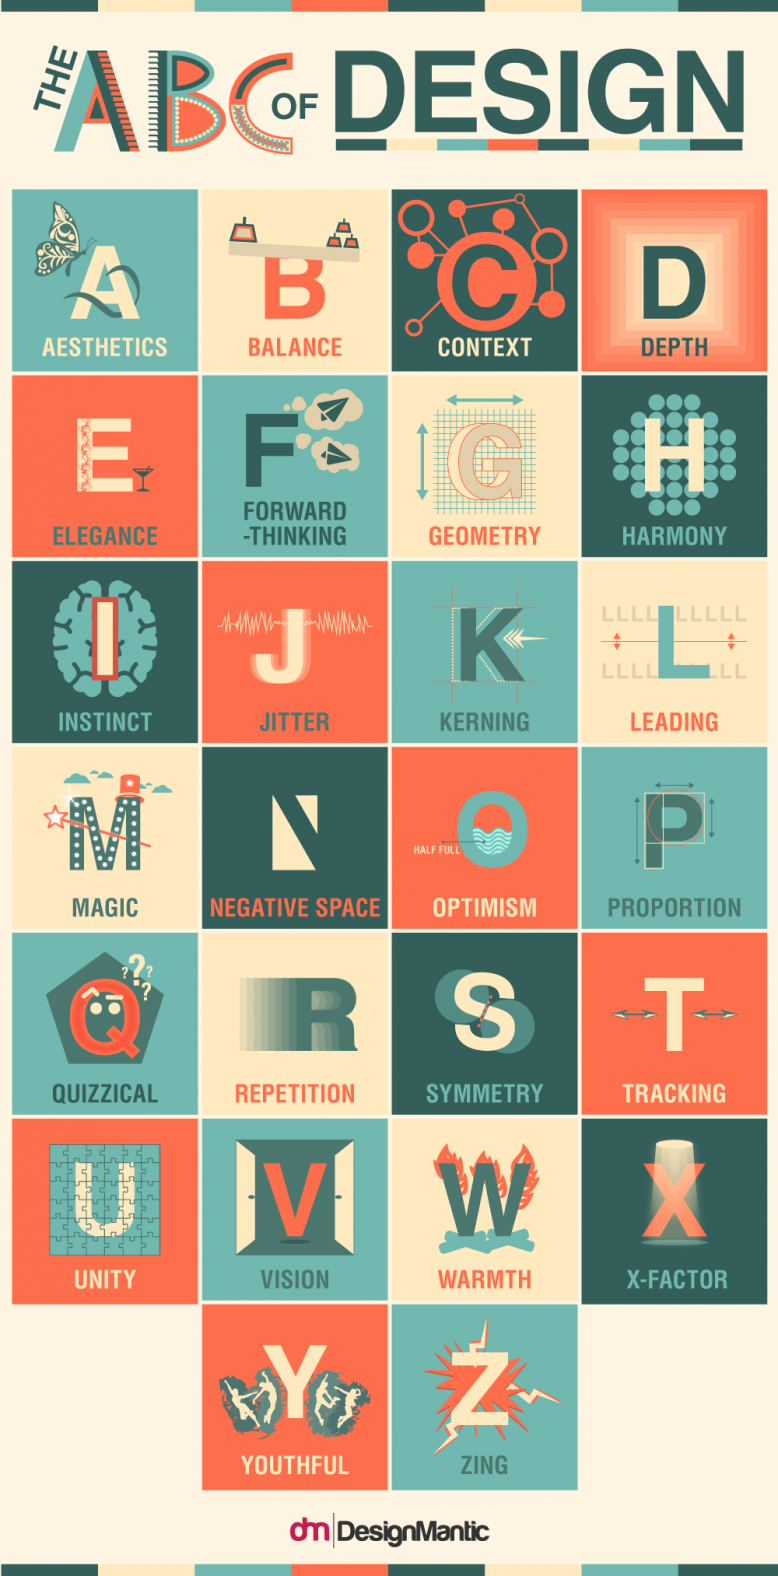 The ABC of Design by DesignMantic